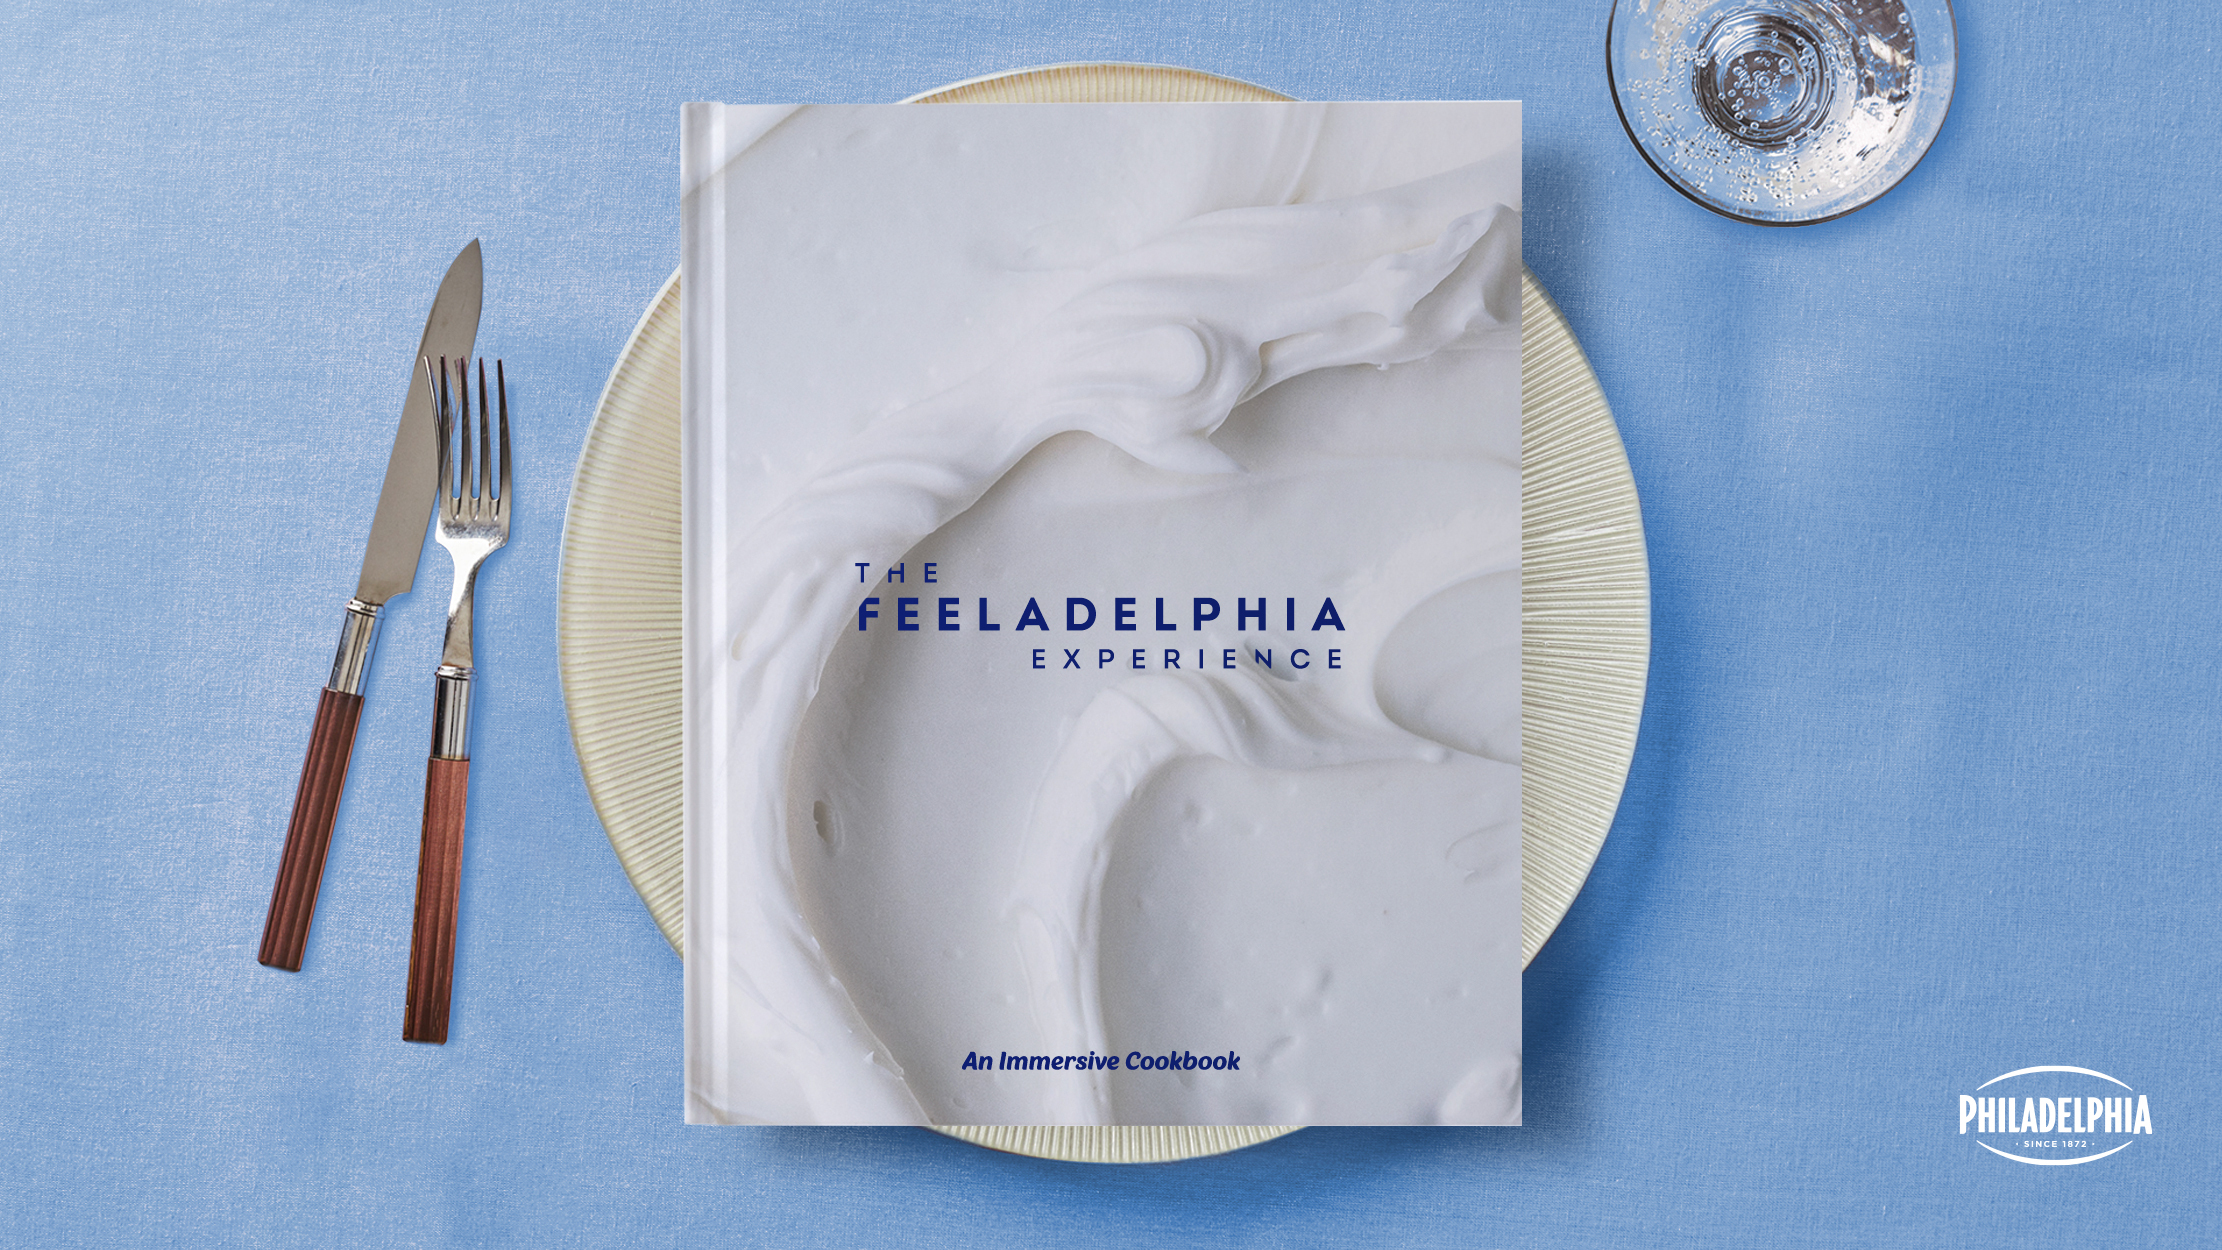 Fans can also purchase the limited-edition Feeladelphia Experience: An Immersive Cookbook.